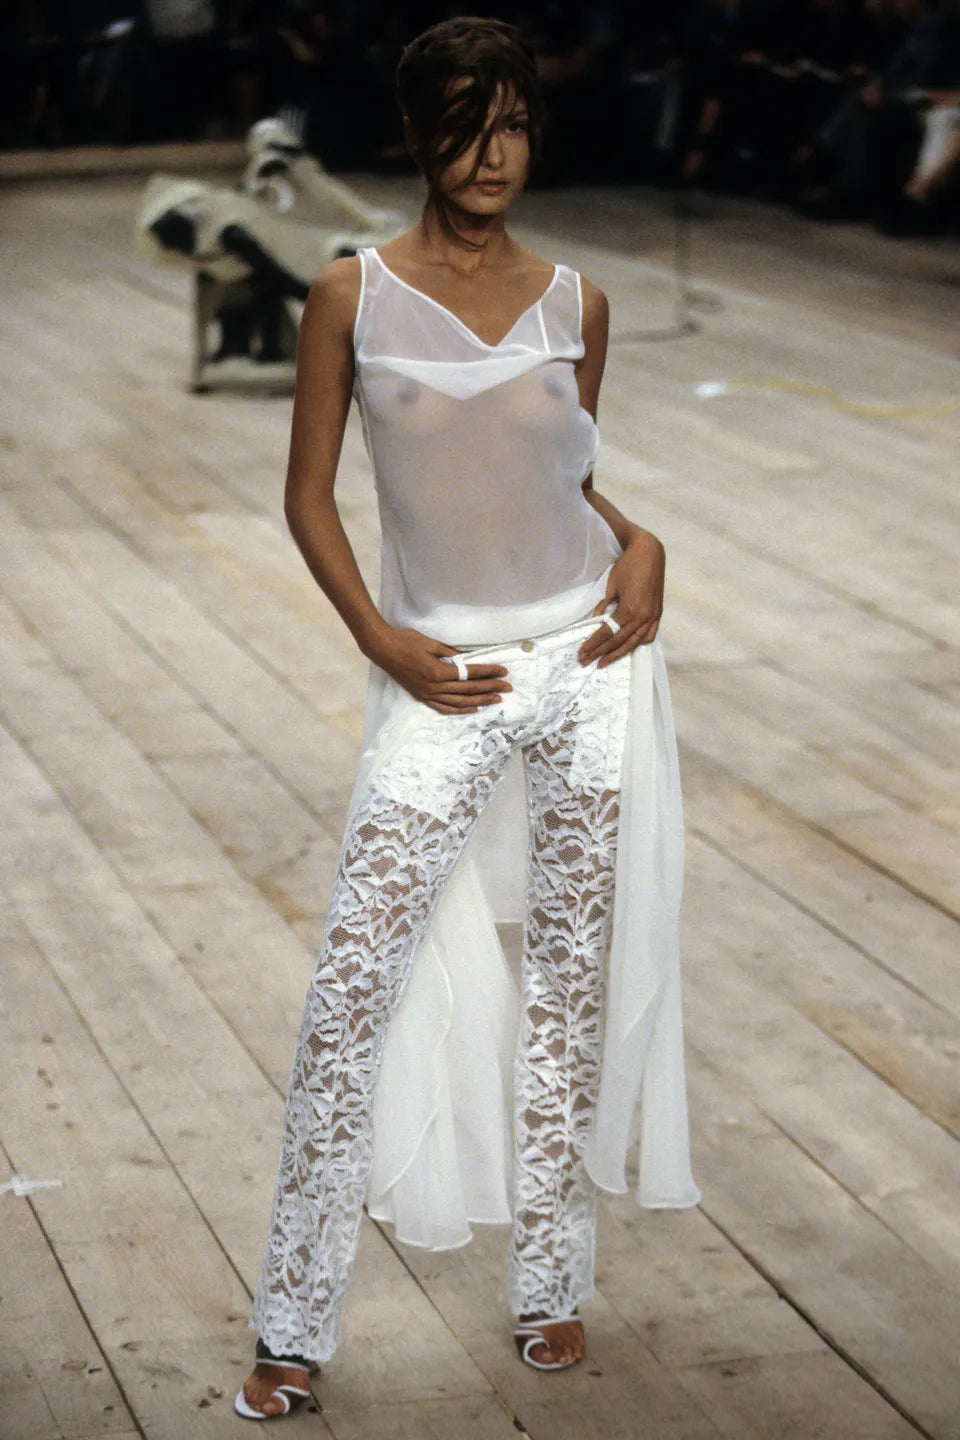 Alexander McQueen Spring 1999 Lace Trousers